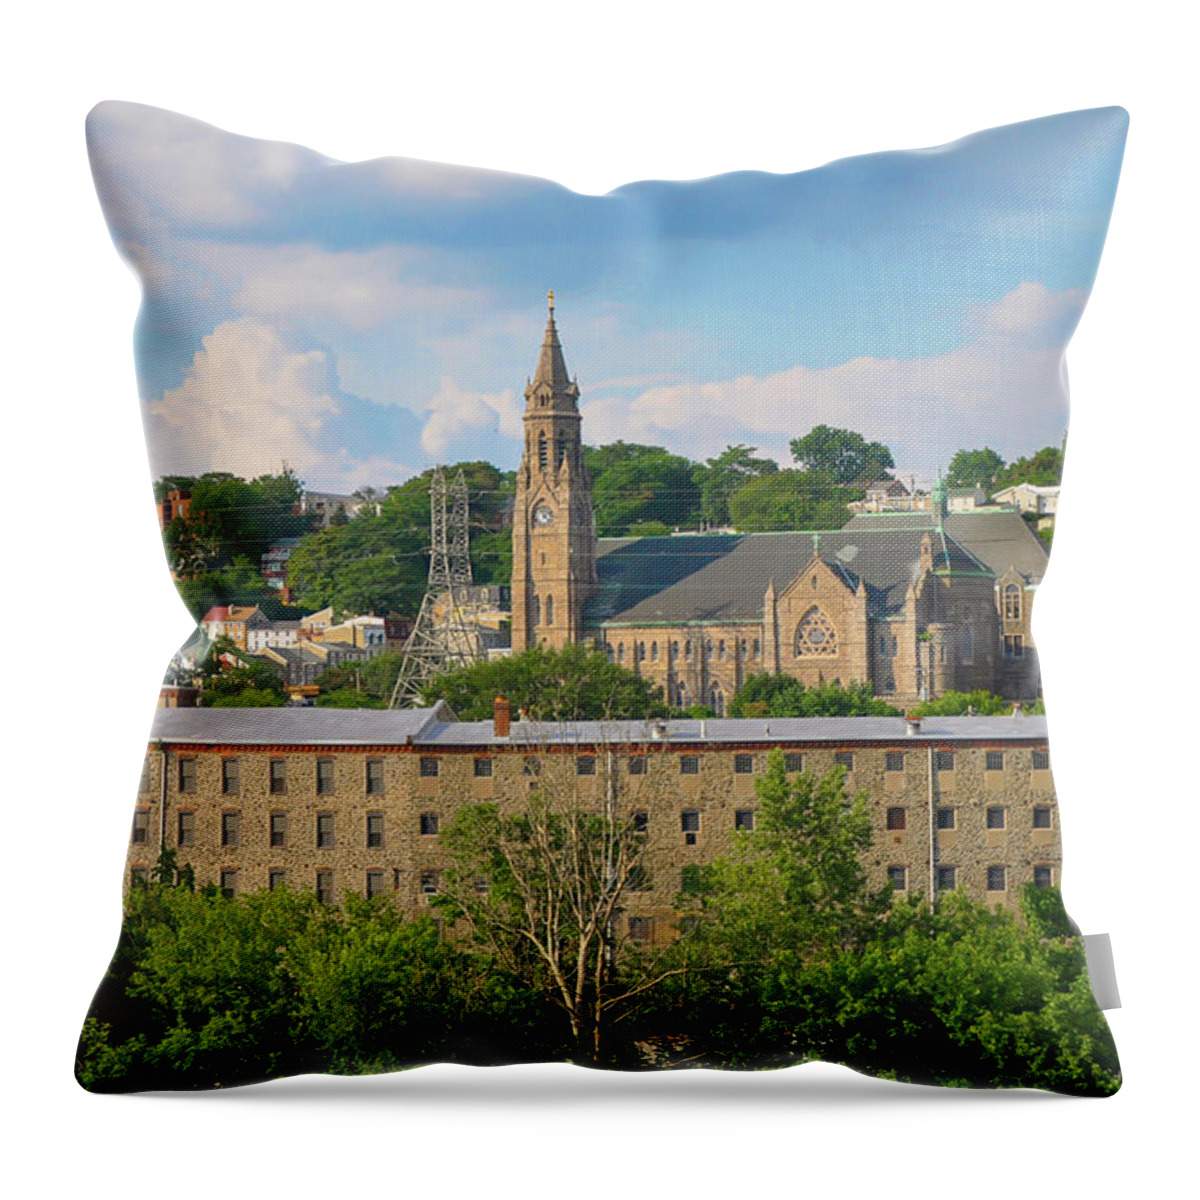 Manayunk Throw Pillow featuring the photograph Manayunk - St John the Baptist - Scofield Mill - Philadelphia by Bill Cannon